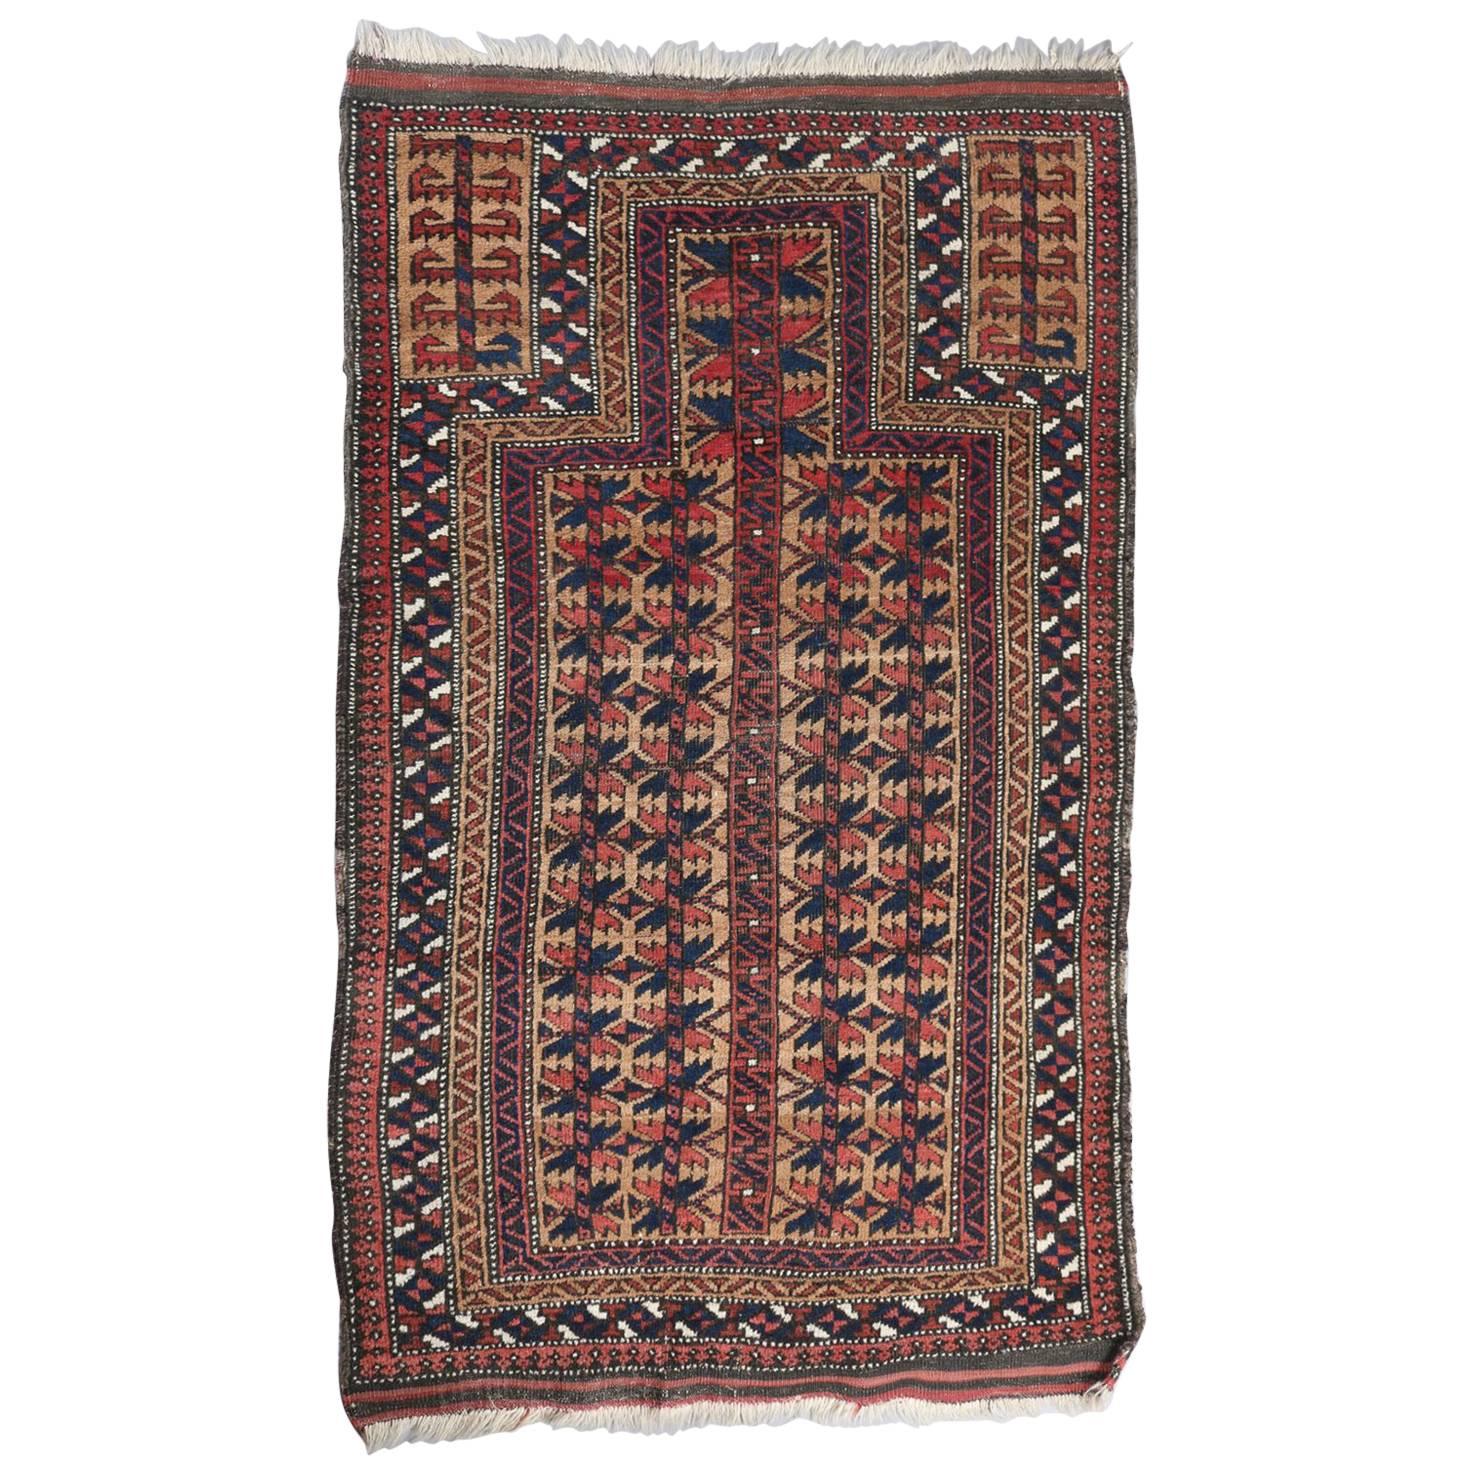 Antique Hand-Knotted Persian Baluch Prayer Rug, 1900